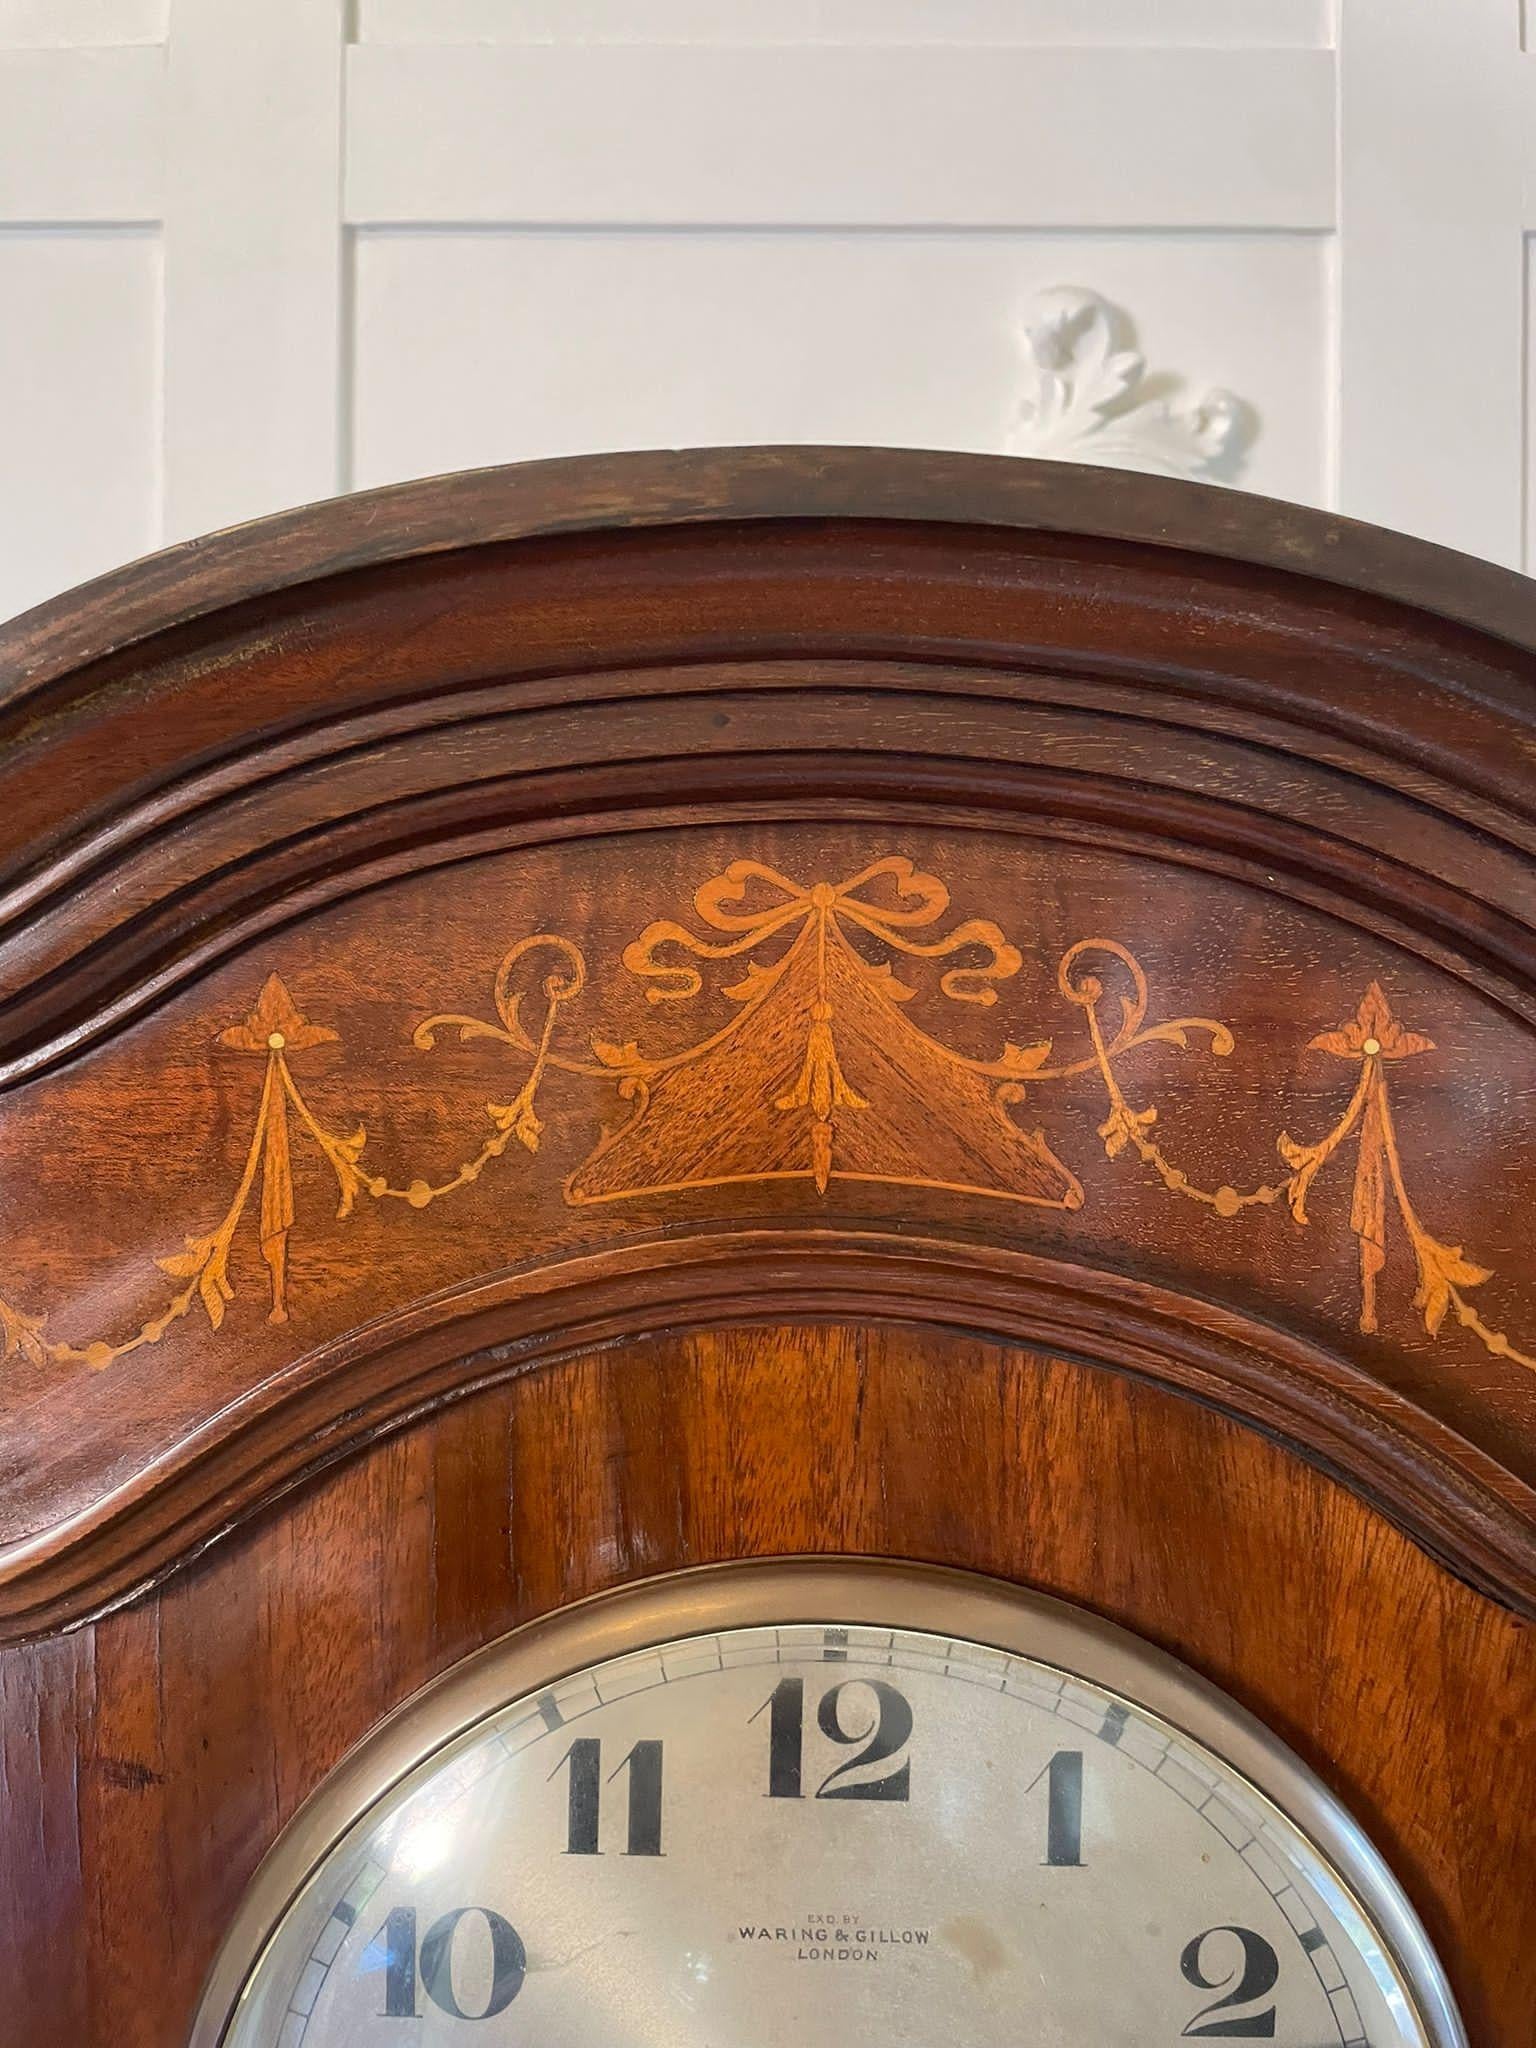 Early 20th Century Unusual Antique Edwardian Quality Mahogany Marquetry Inlaid Grandmother Clock